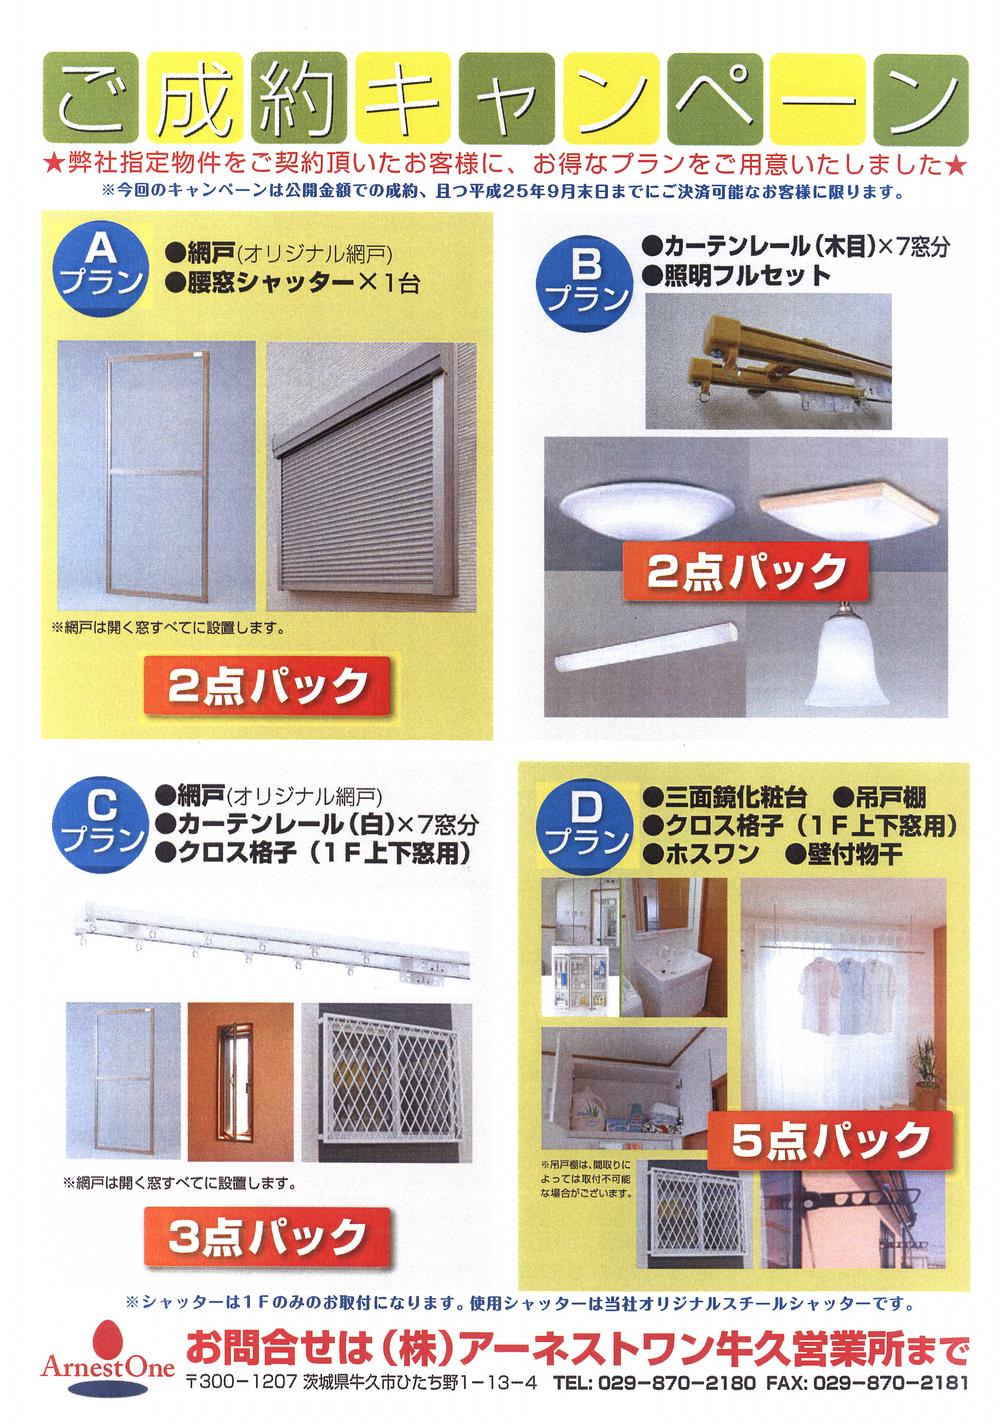 Other. New life support! Screen door ・ Curtain rail ・ Lighting full set ・ shutter ・ Three-sided mirror vanity ・ Hanging cupboard ・ Interference with in-room wall material ・ From the surface grating 2 ~ 5-point pack gift! (Until the end of January contract conditions ・ Than the seller)